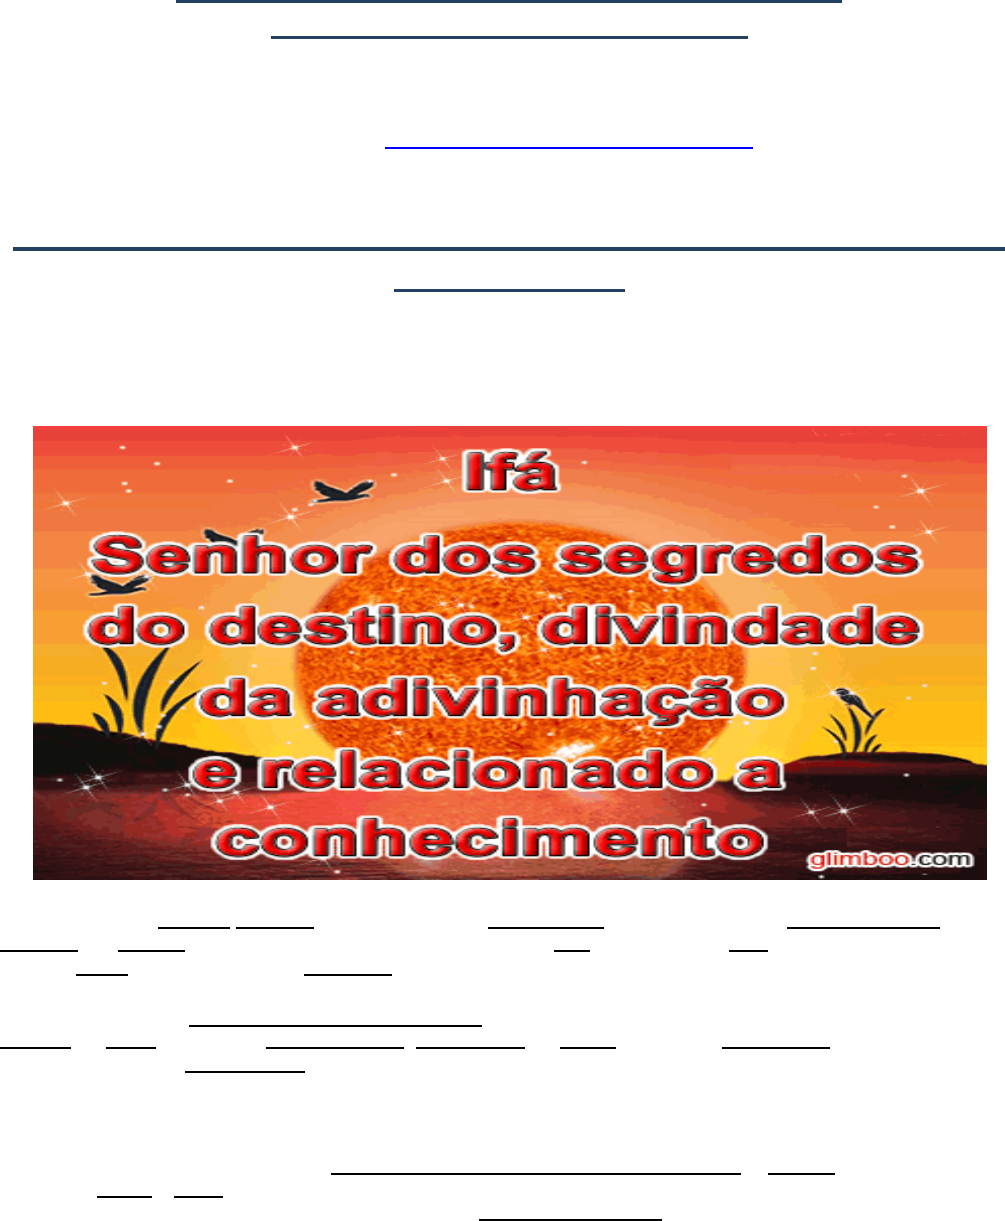 Signos Ifa on the App Store